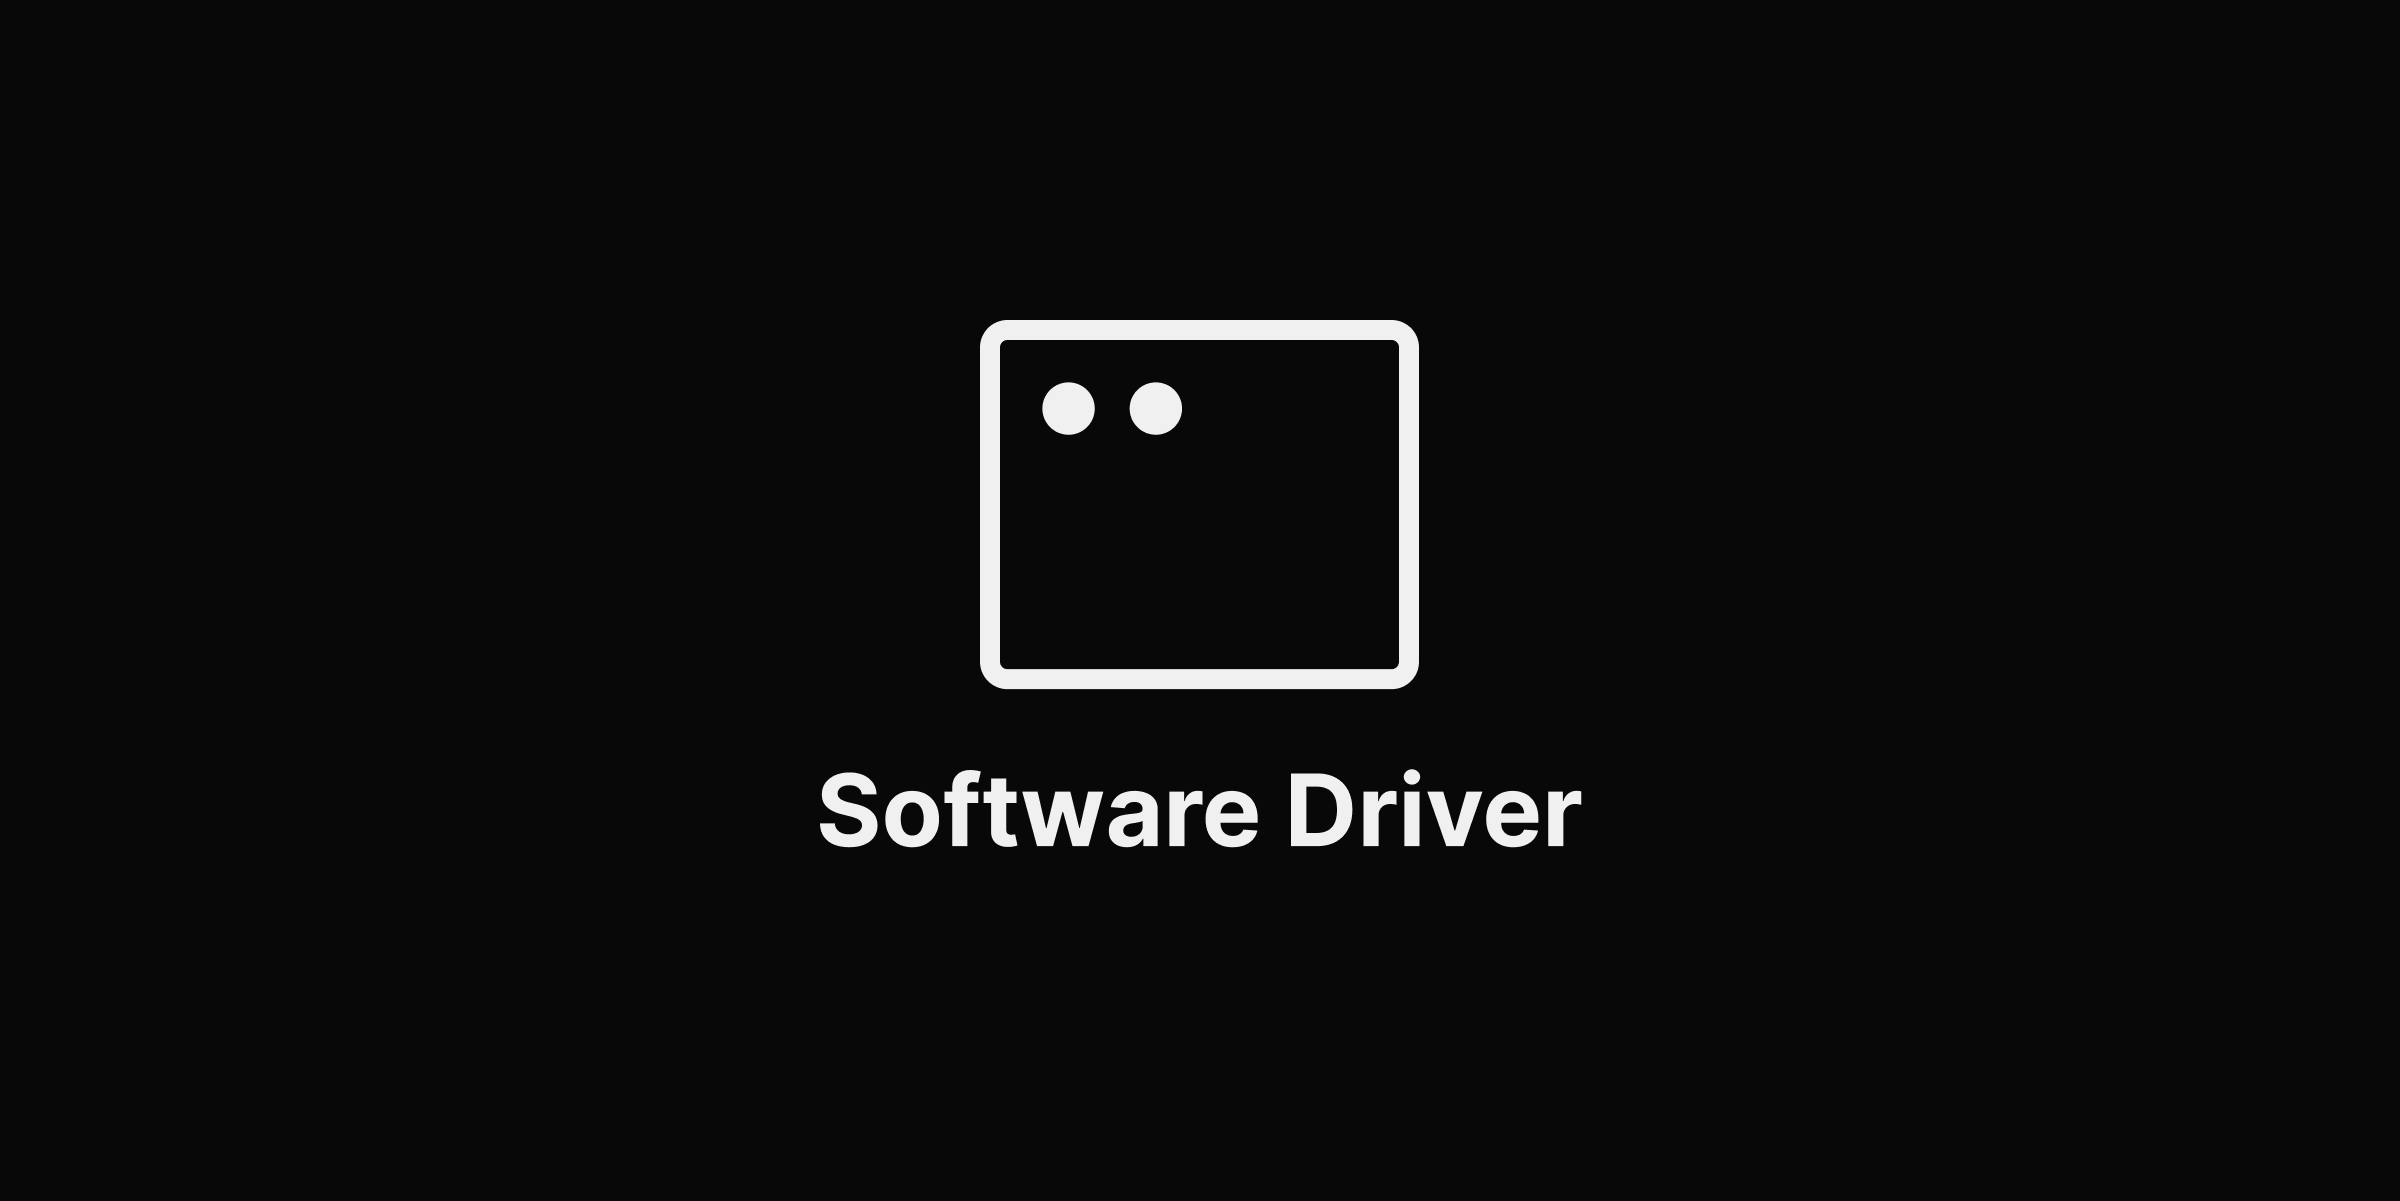 Software driver